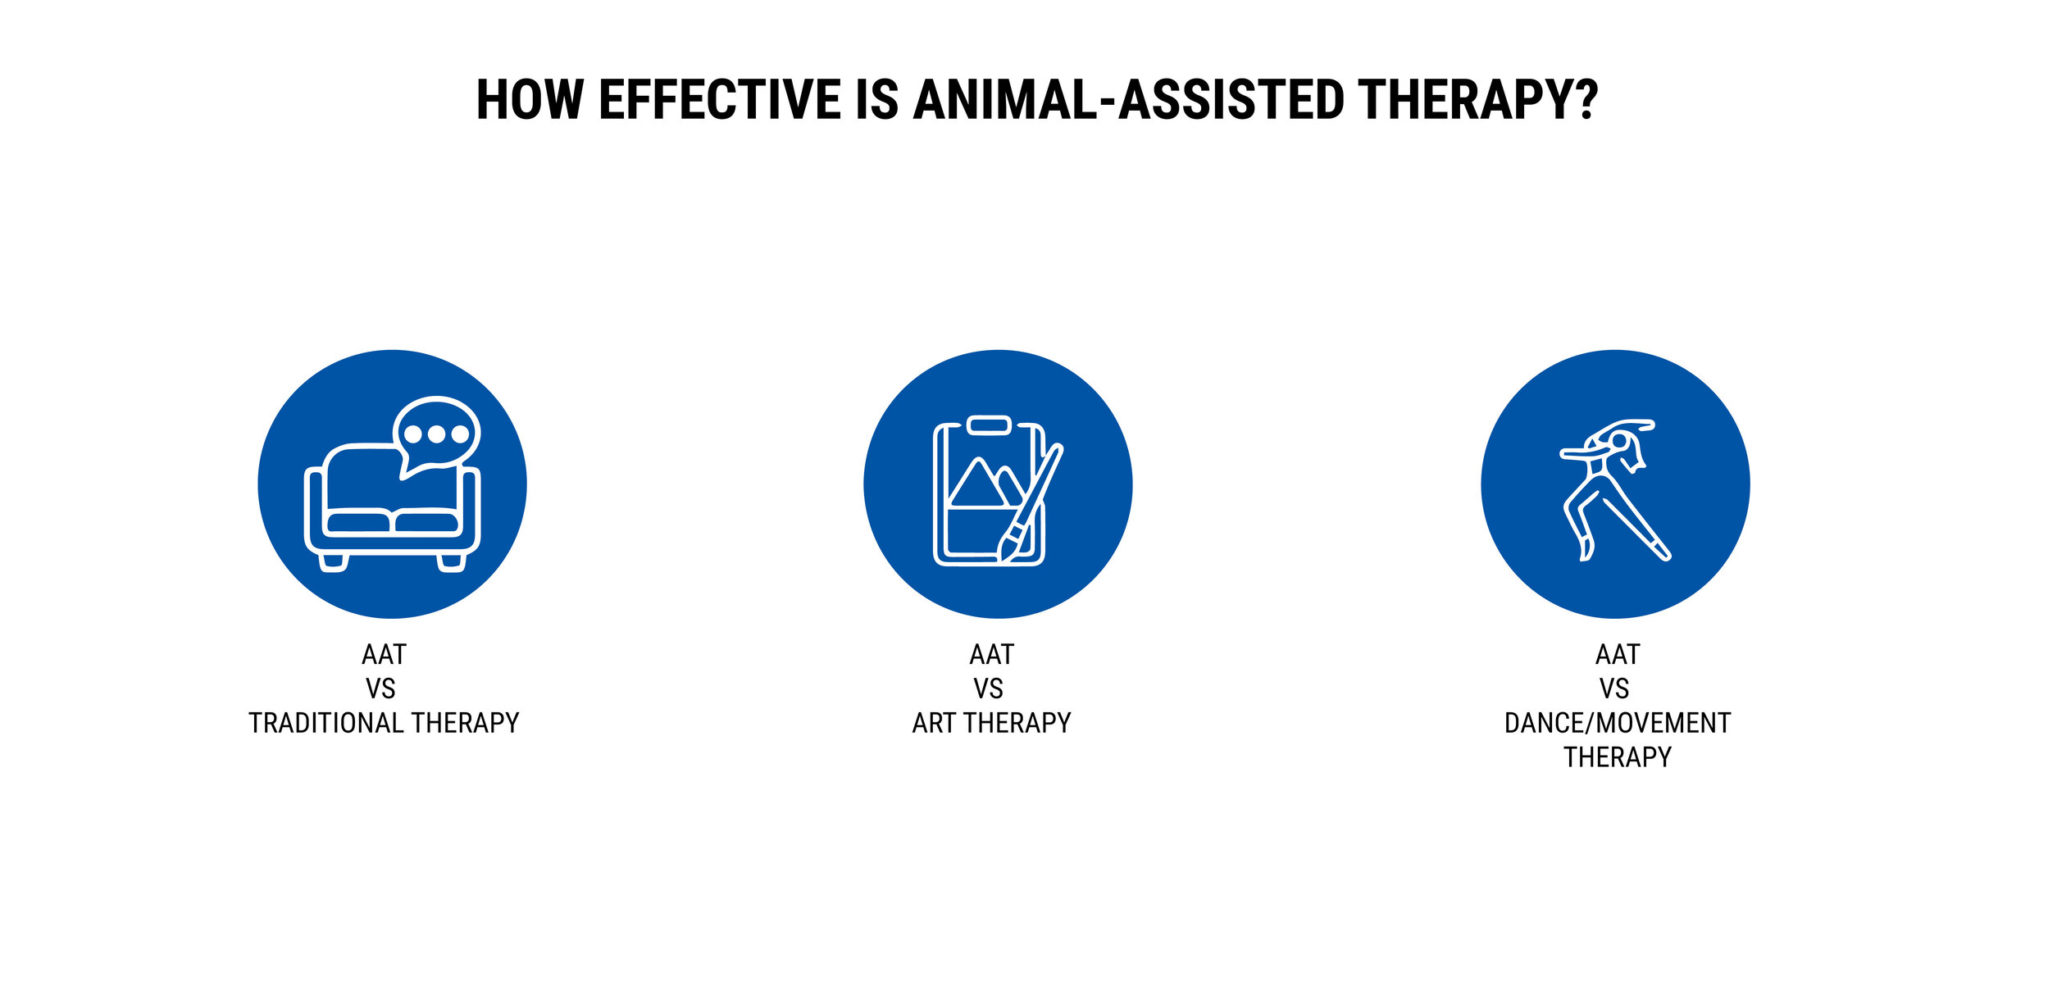 HOW EFFECTIVE IS ANIMAL-ASSISTED THERAPY